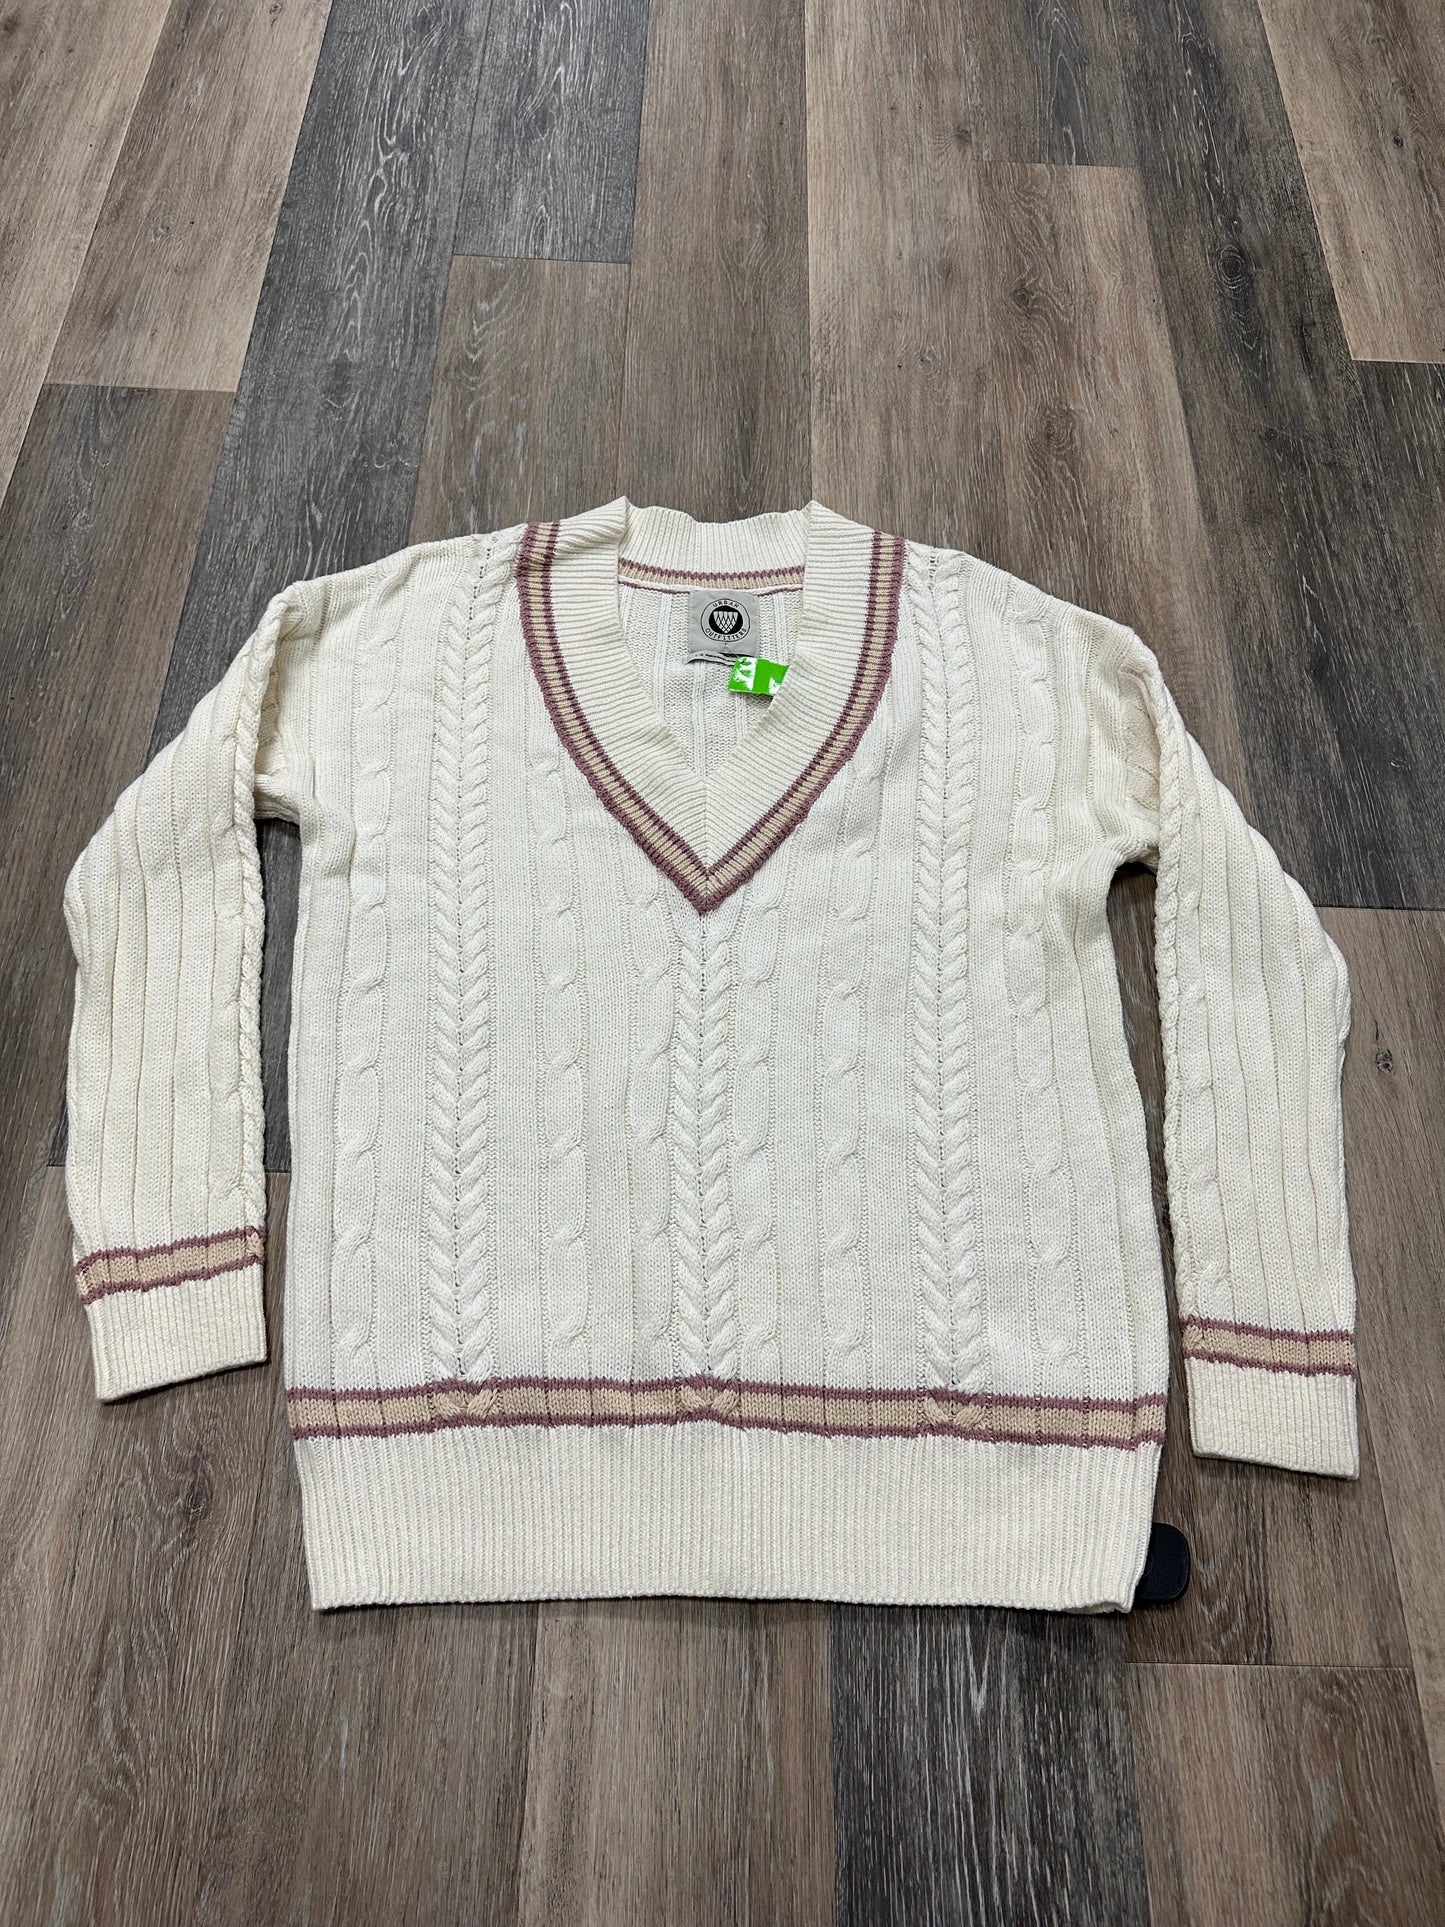 Sweater By Urban Outfitters  Size: L